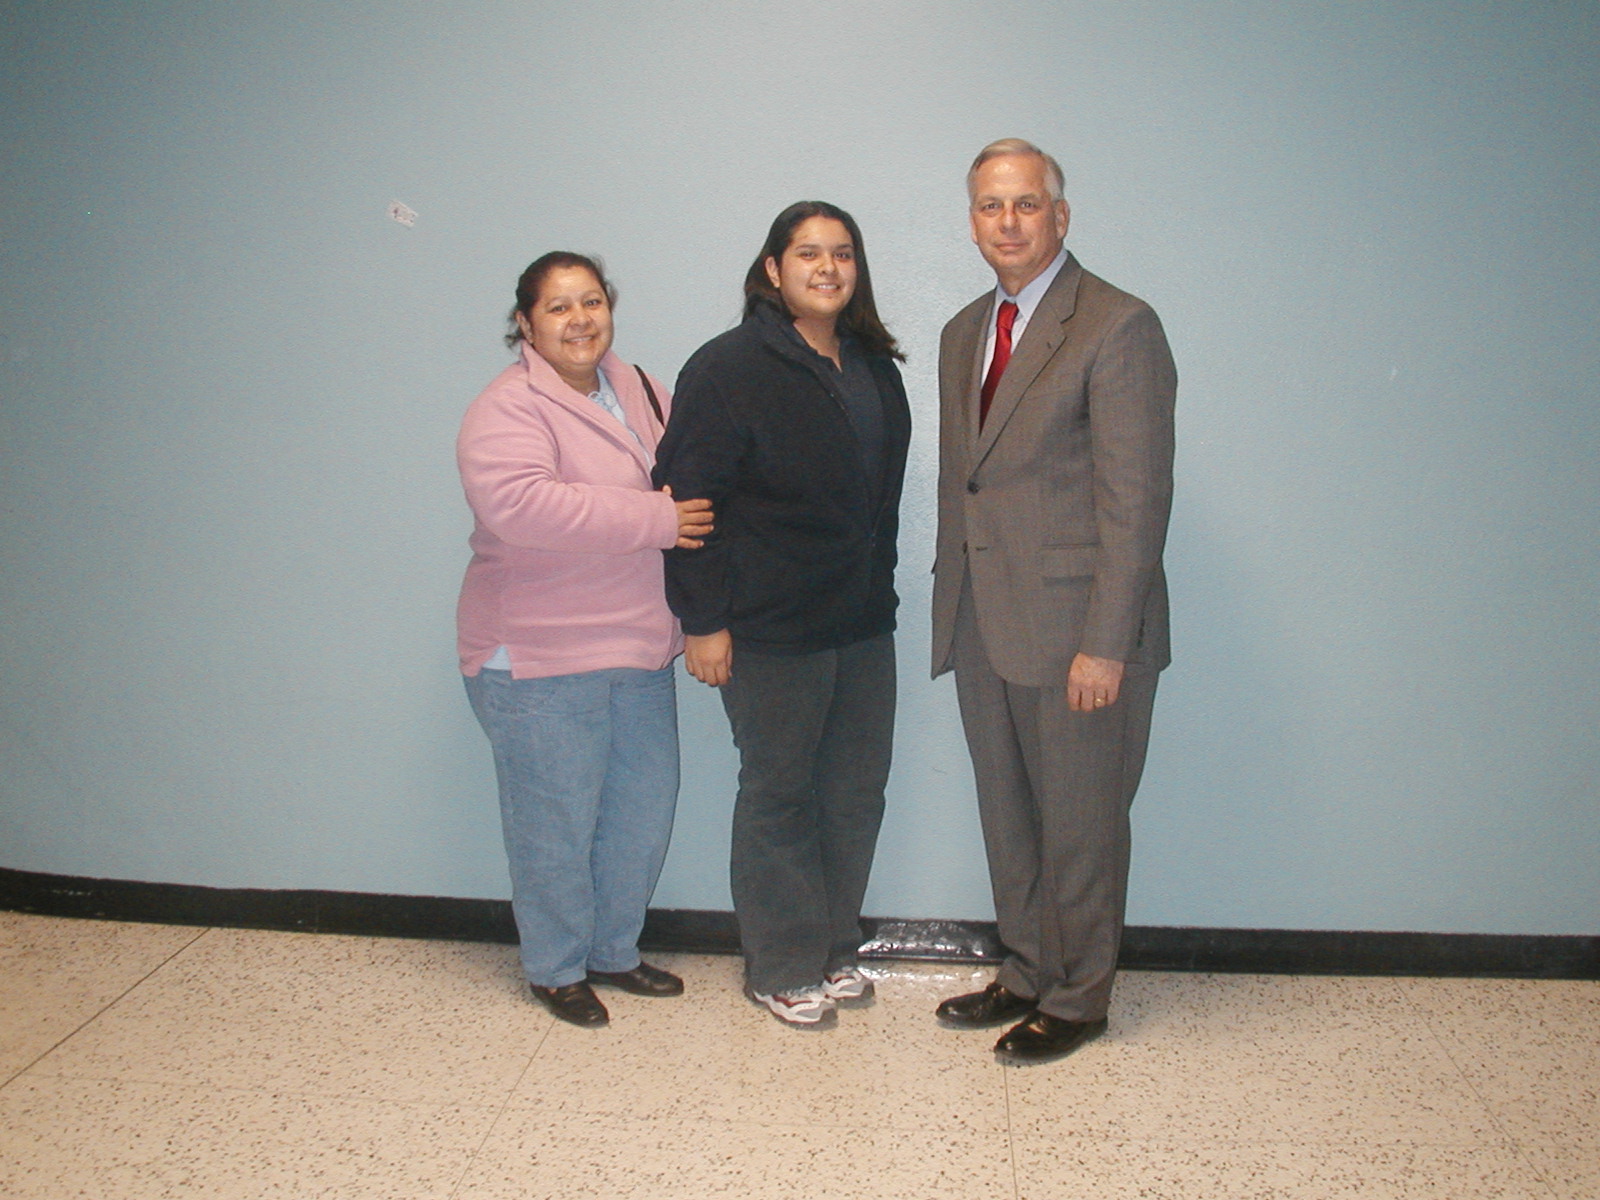 Faviola Flores, scholarship winner, and her mother with Congressman Green